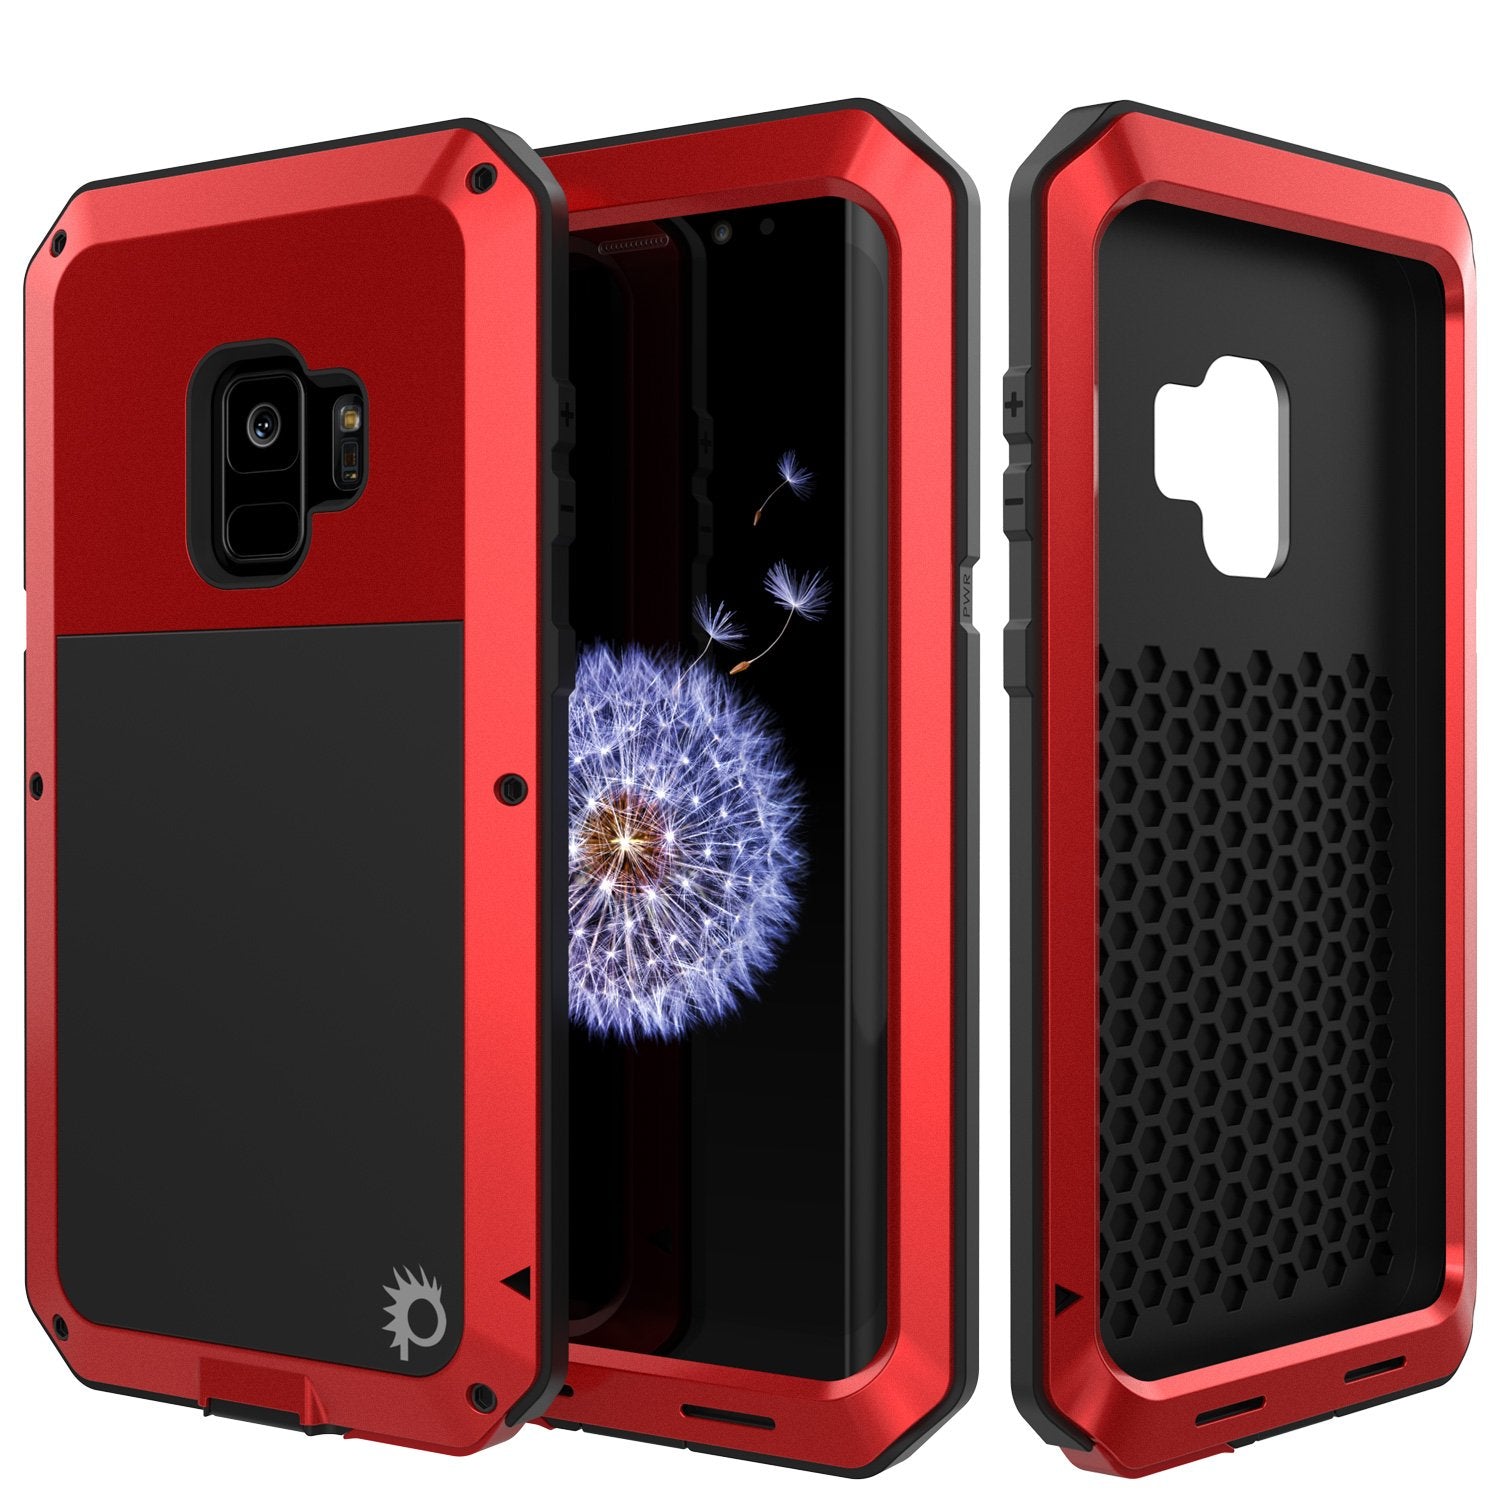 Galaxy S9 Metal Case, Heavy Duty Military Grade Rugged Armor Cover [shock proof] Hybrid Full Body Hard Aluminum & TPU Design [non slip] W/ Prime Drop Protection for Samsung Galaxy S9 [Red]